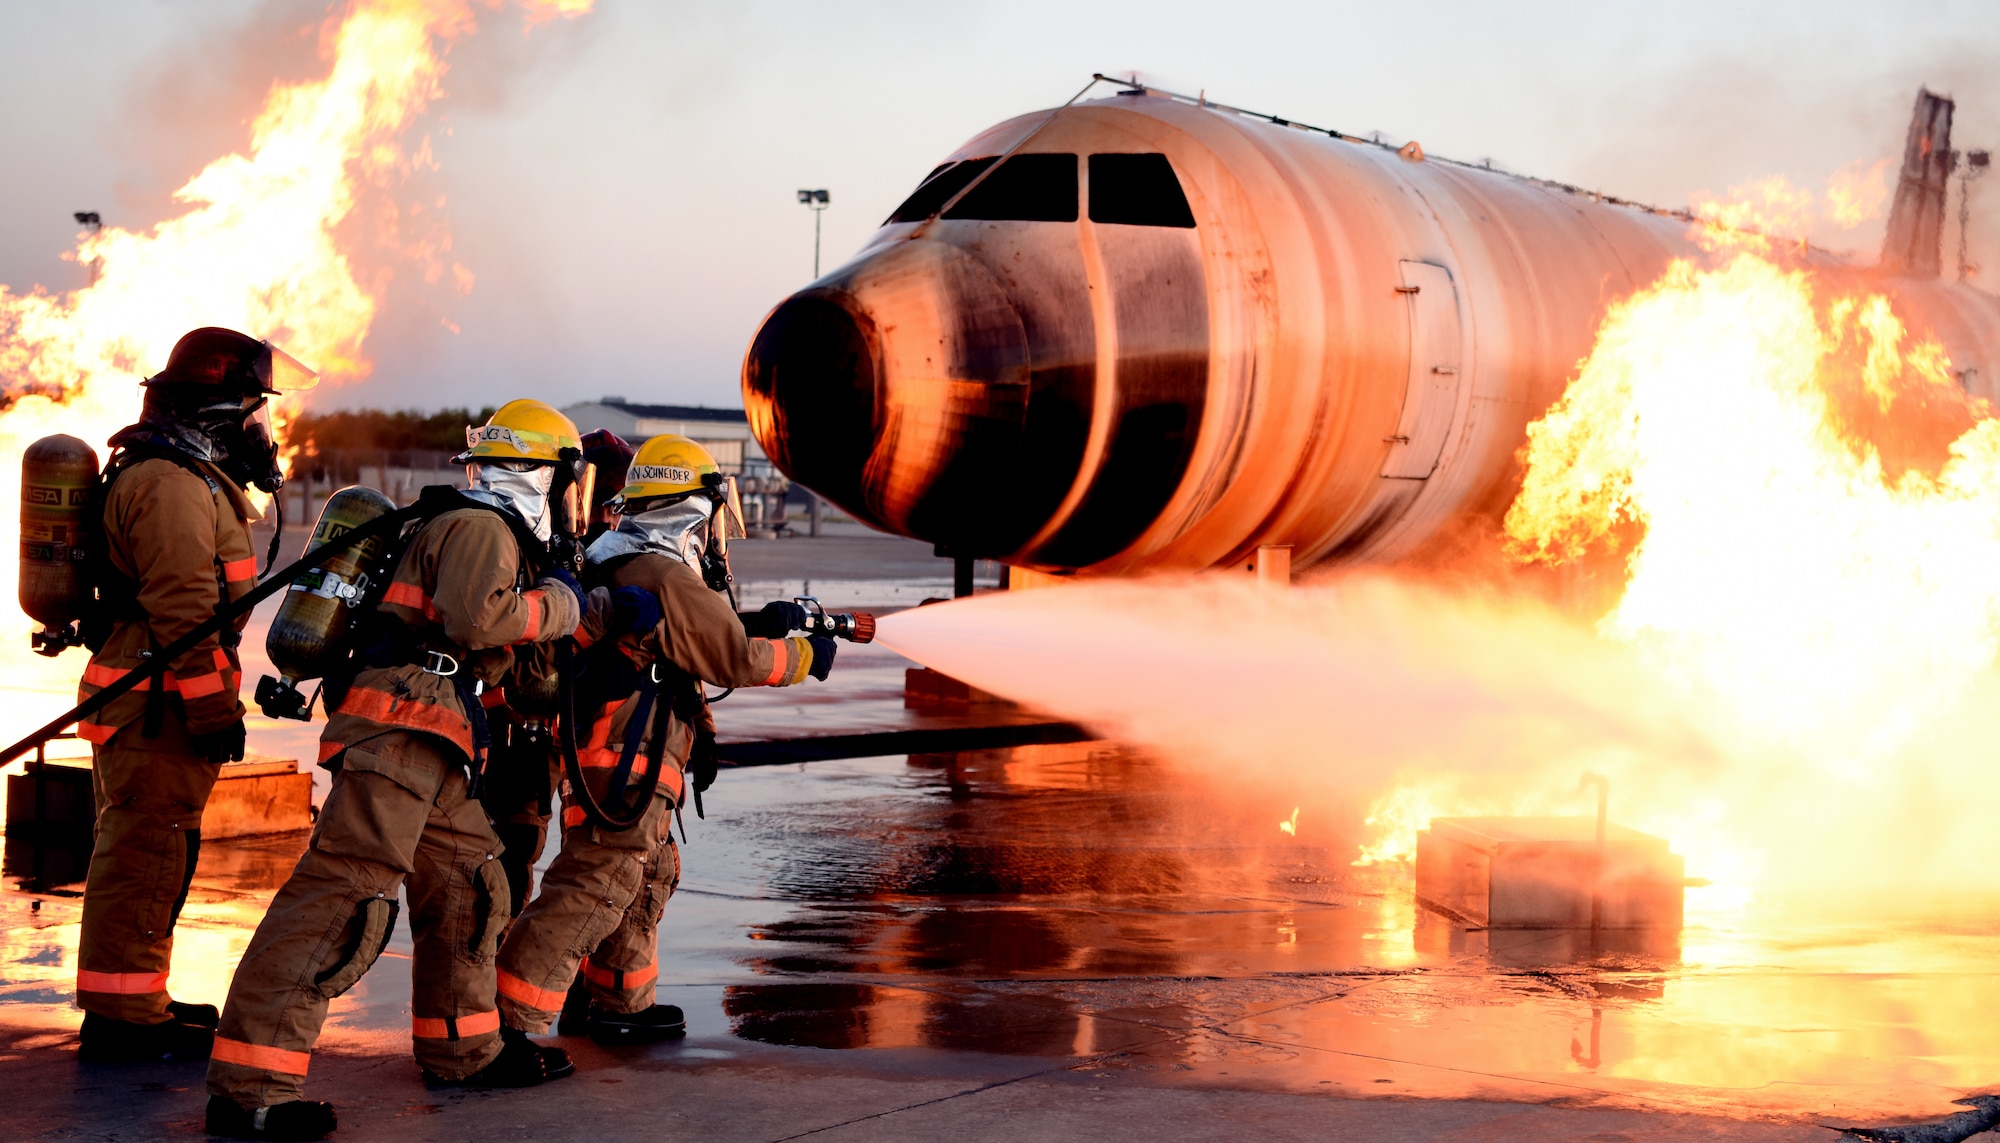 U.S. Air Force Airman Kristina Schneider, 312th Training Squadron student, approaches an exterior aircraft fire with a water hose outside the Louis F. Garland Department of Defense Fire Academy on Goodfellow Air Force Base, Texas, August 16, 2019. Though Schneider has graduated three fire academies throughout her civilian firefighting career, she expands her knowledge with aircraft fire suppression during her technical school training at Goodfellow.  (U.S. Air Force photo by Airman 1st Class Ethan Sherwood/Released)